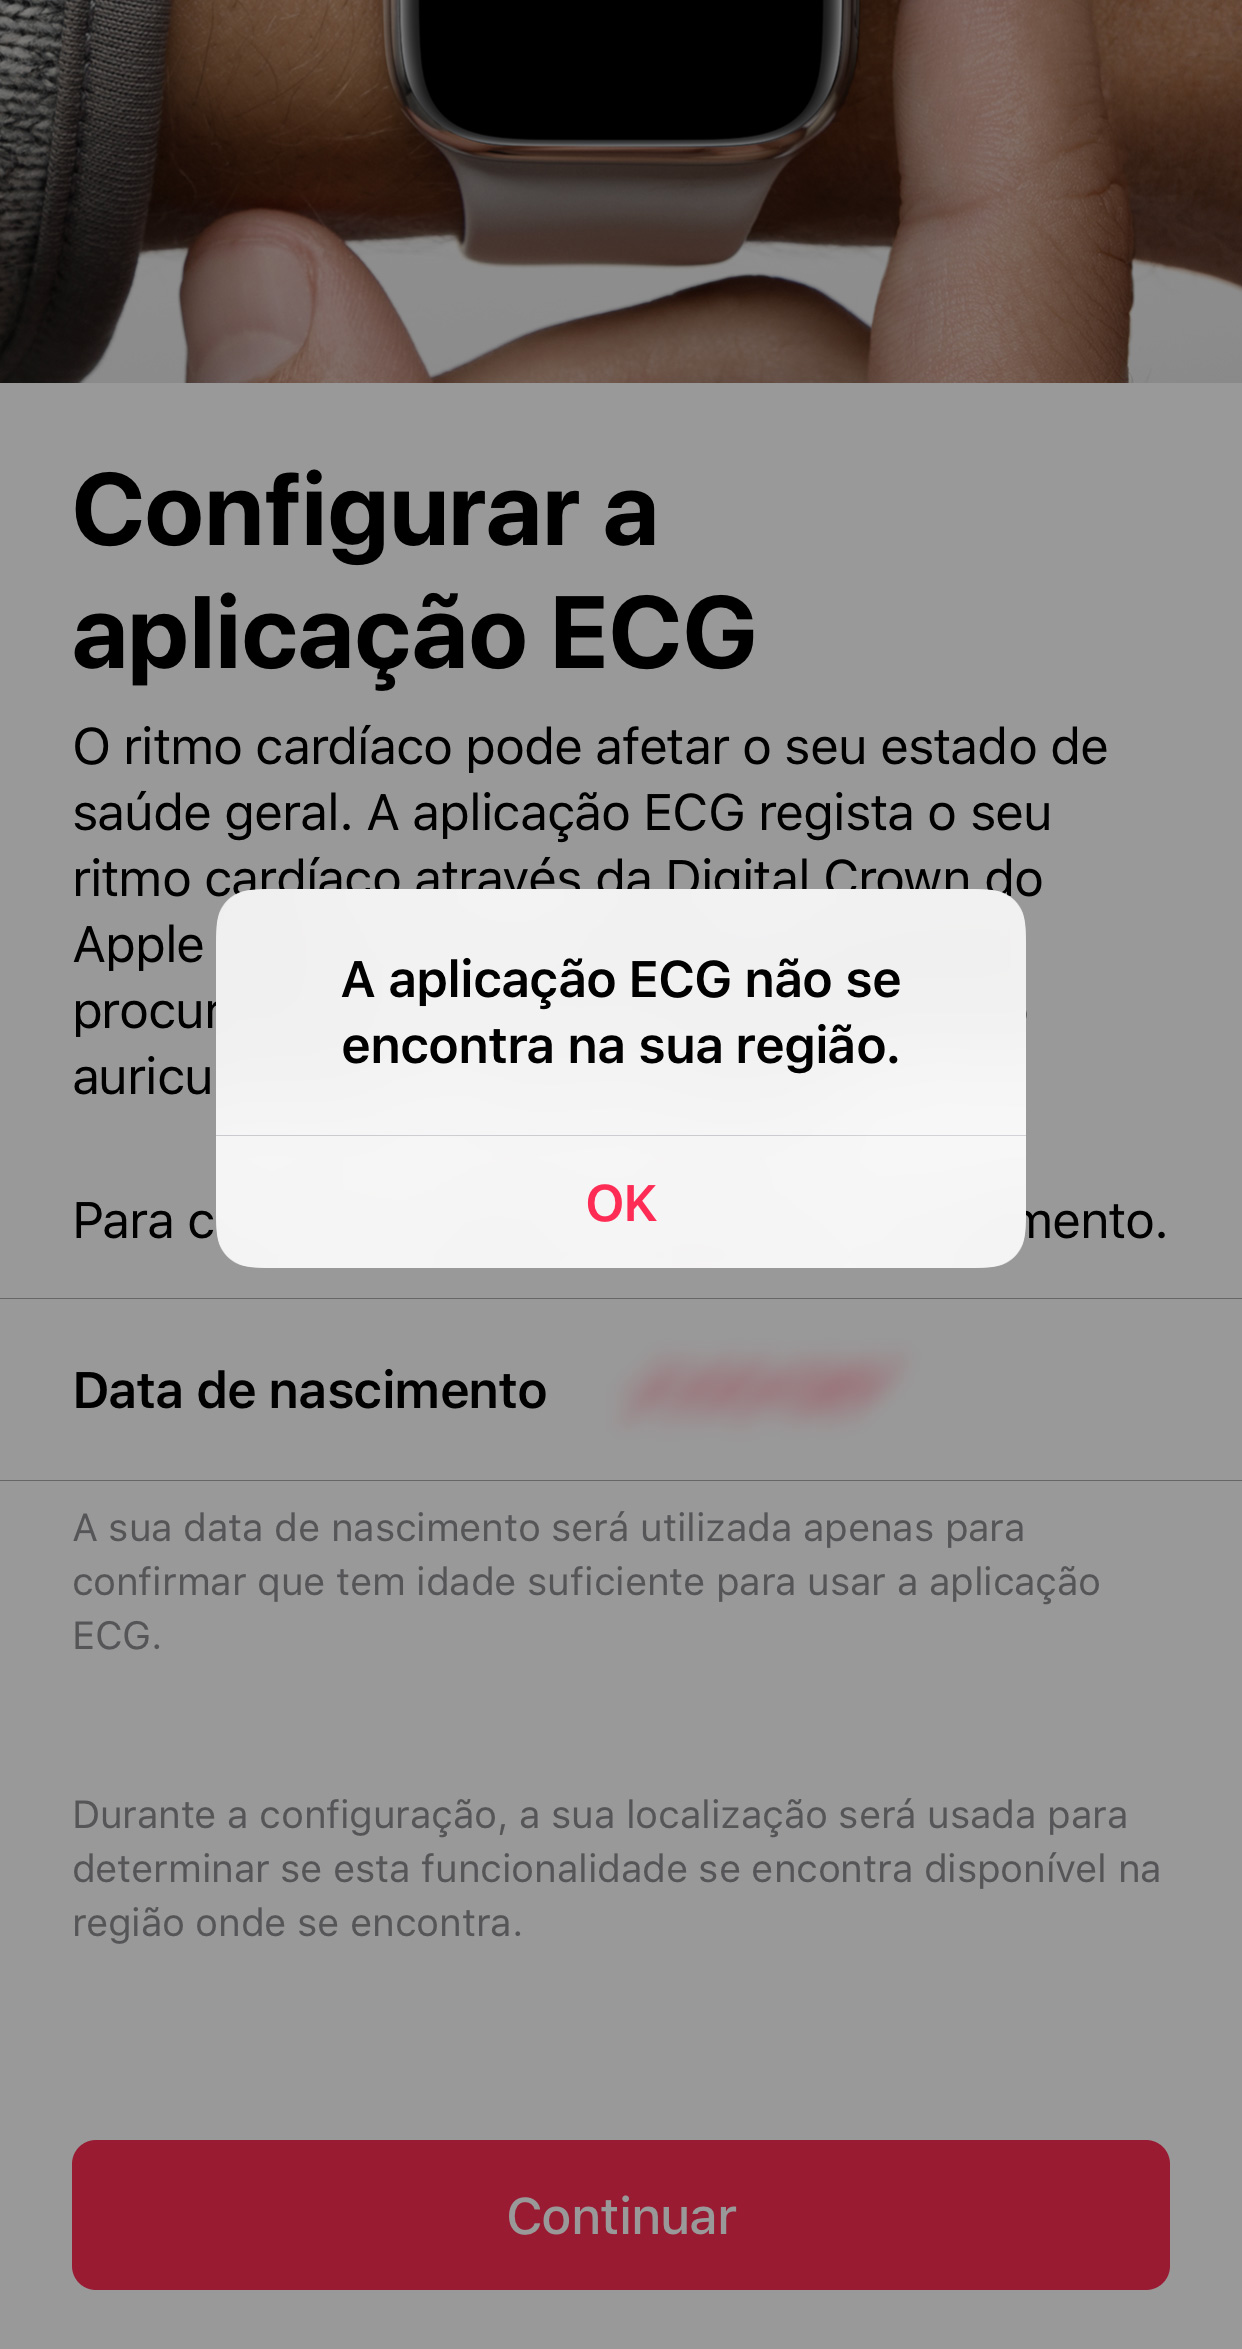 [BDI Responde] Questions and answers about Apple Watch in Brazil